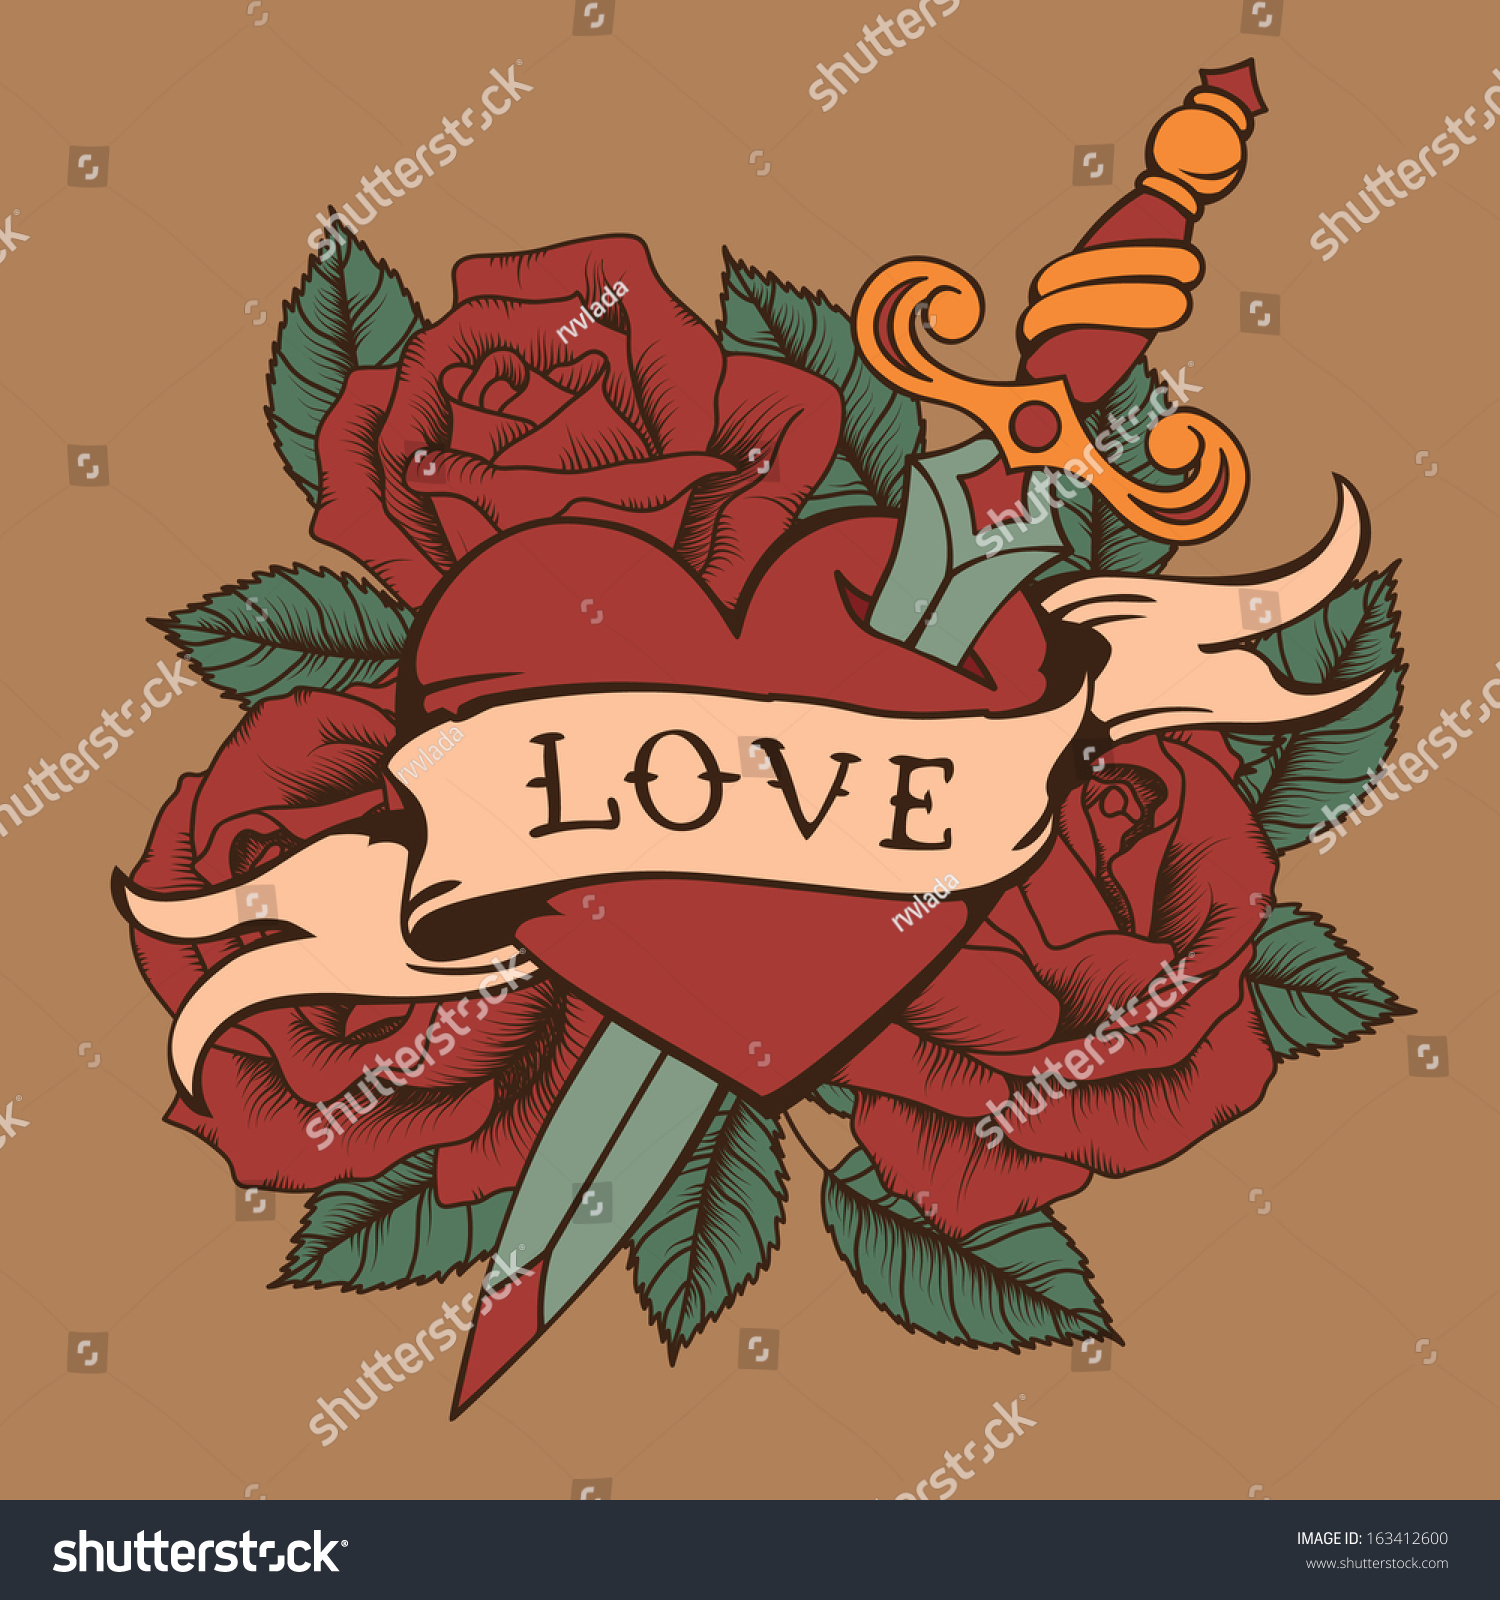 Tattoo Heart With Roses And Knife Stock Vector Illustration 163412600 ...